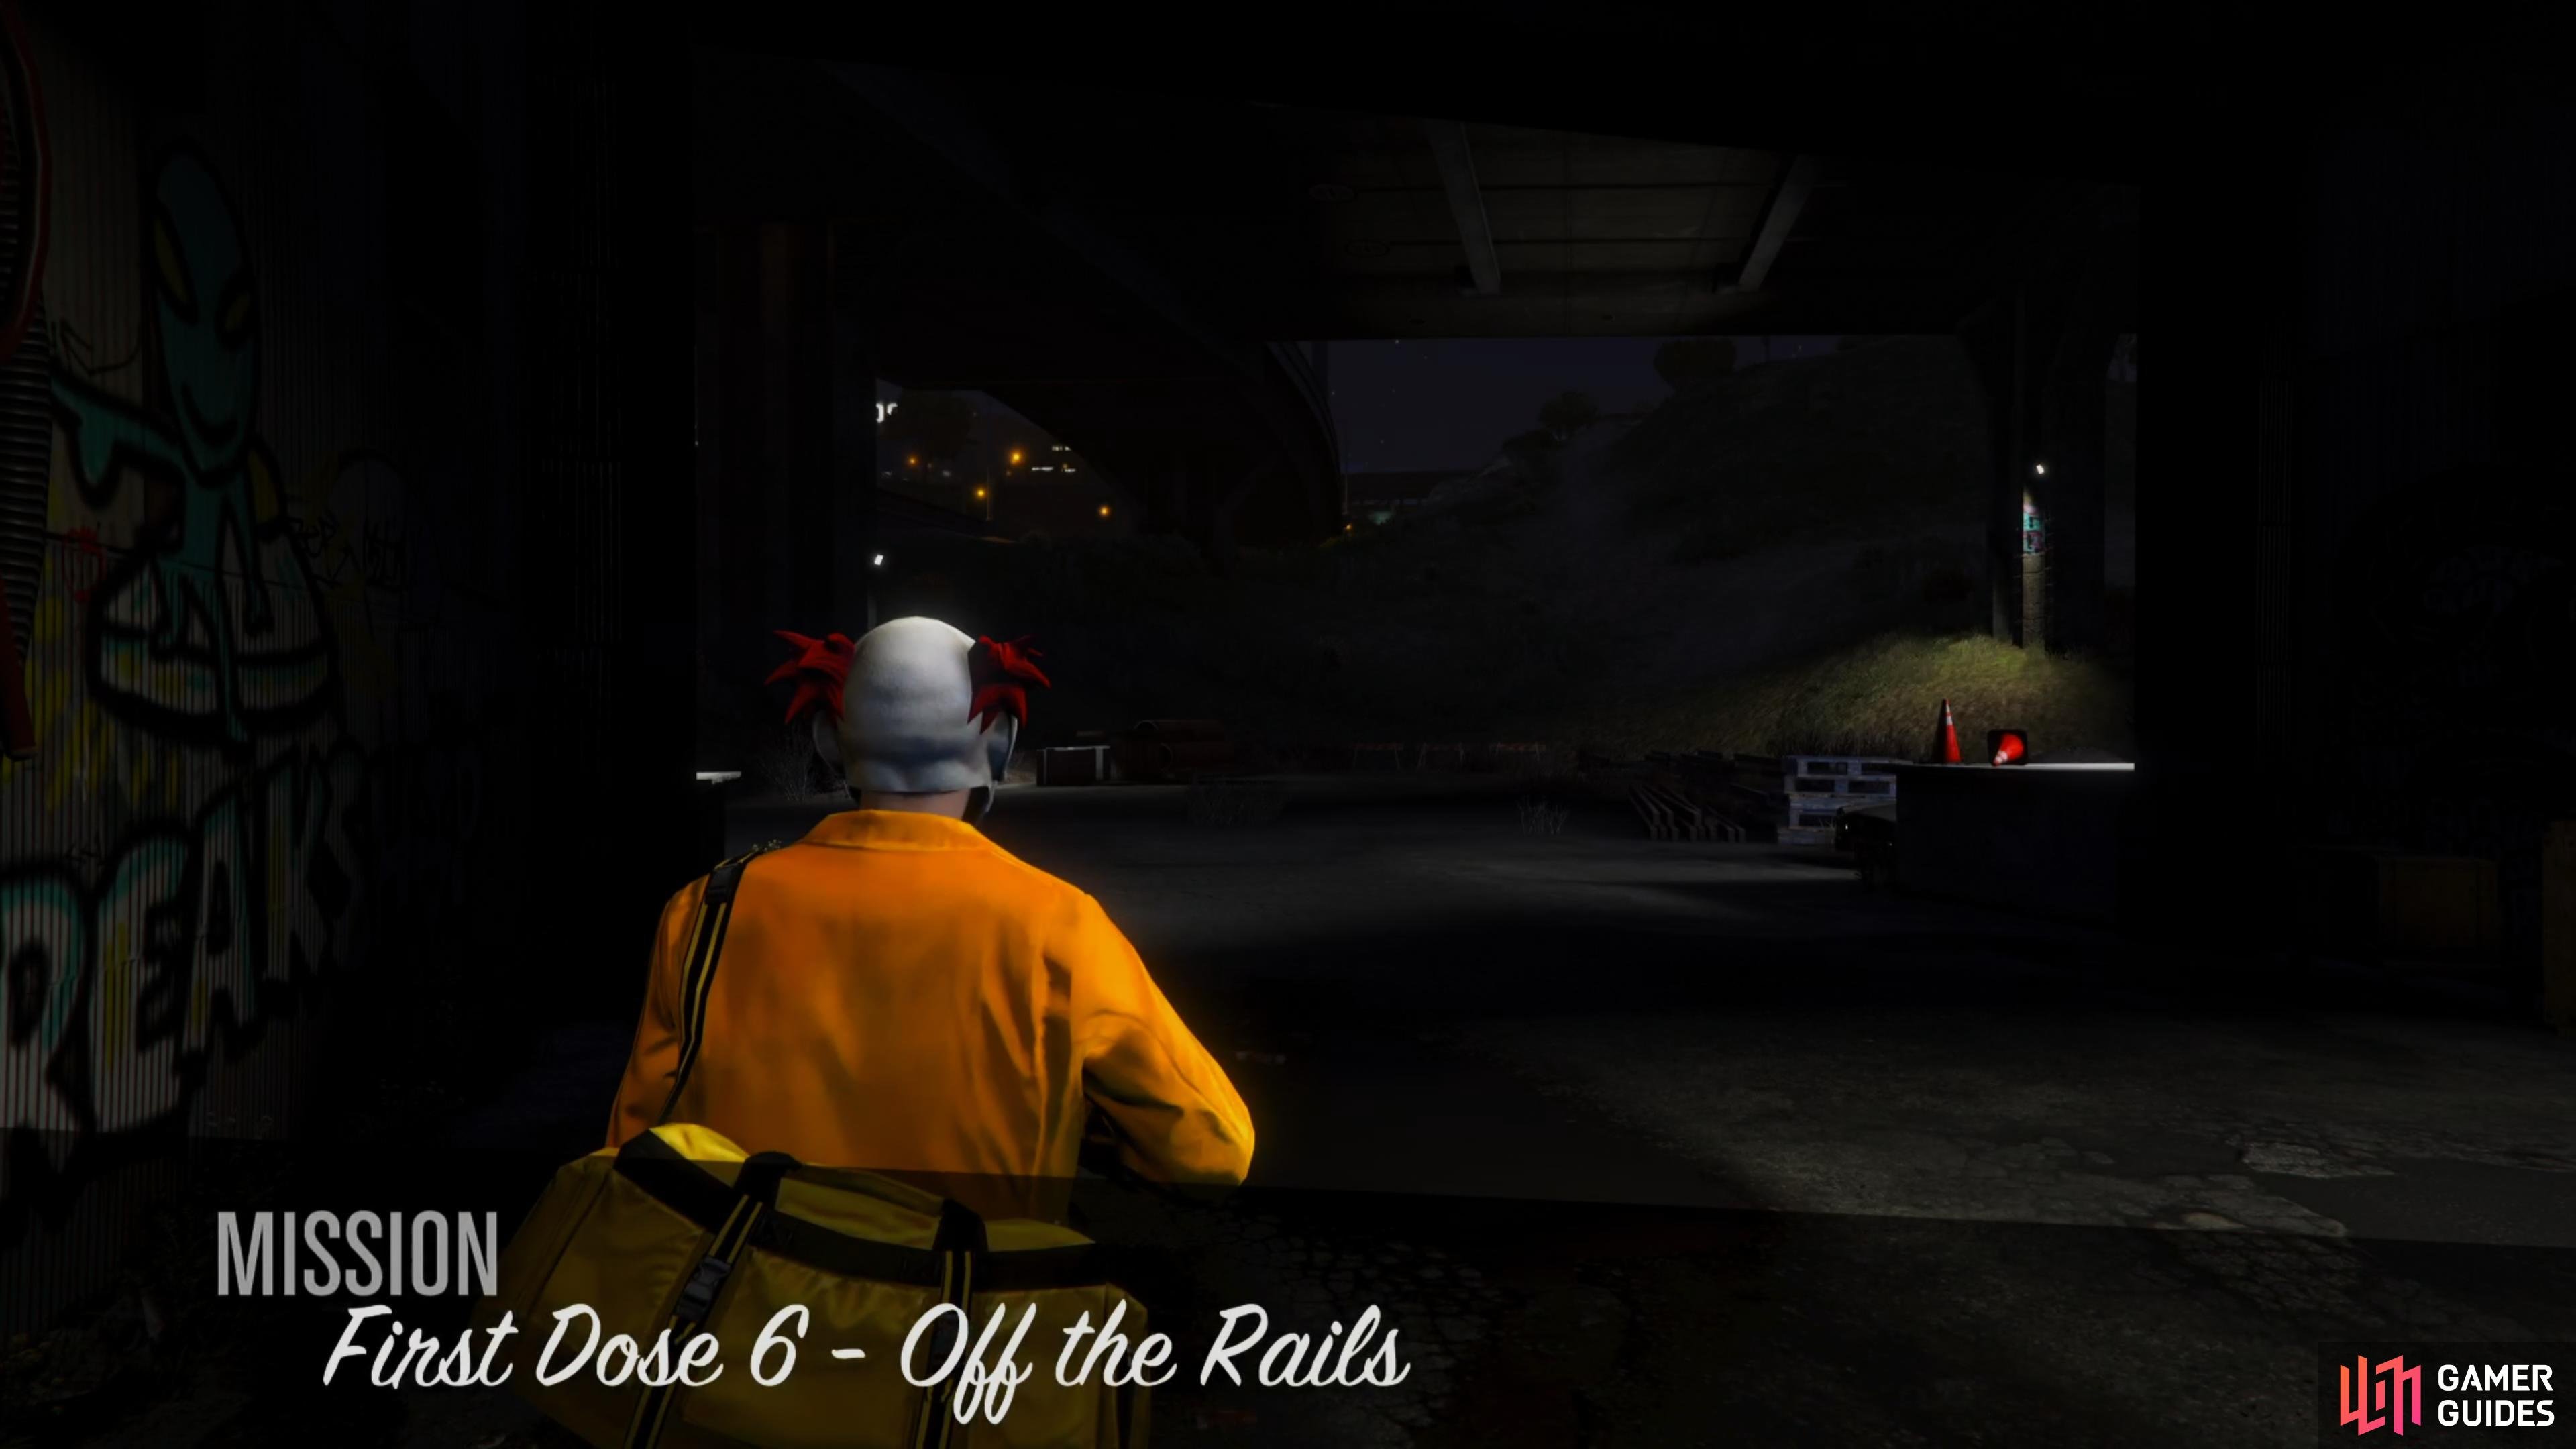 You can start the Off the Rails Mission from the Abandoned Warehouse.